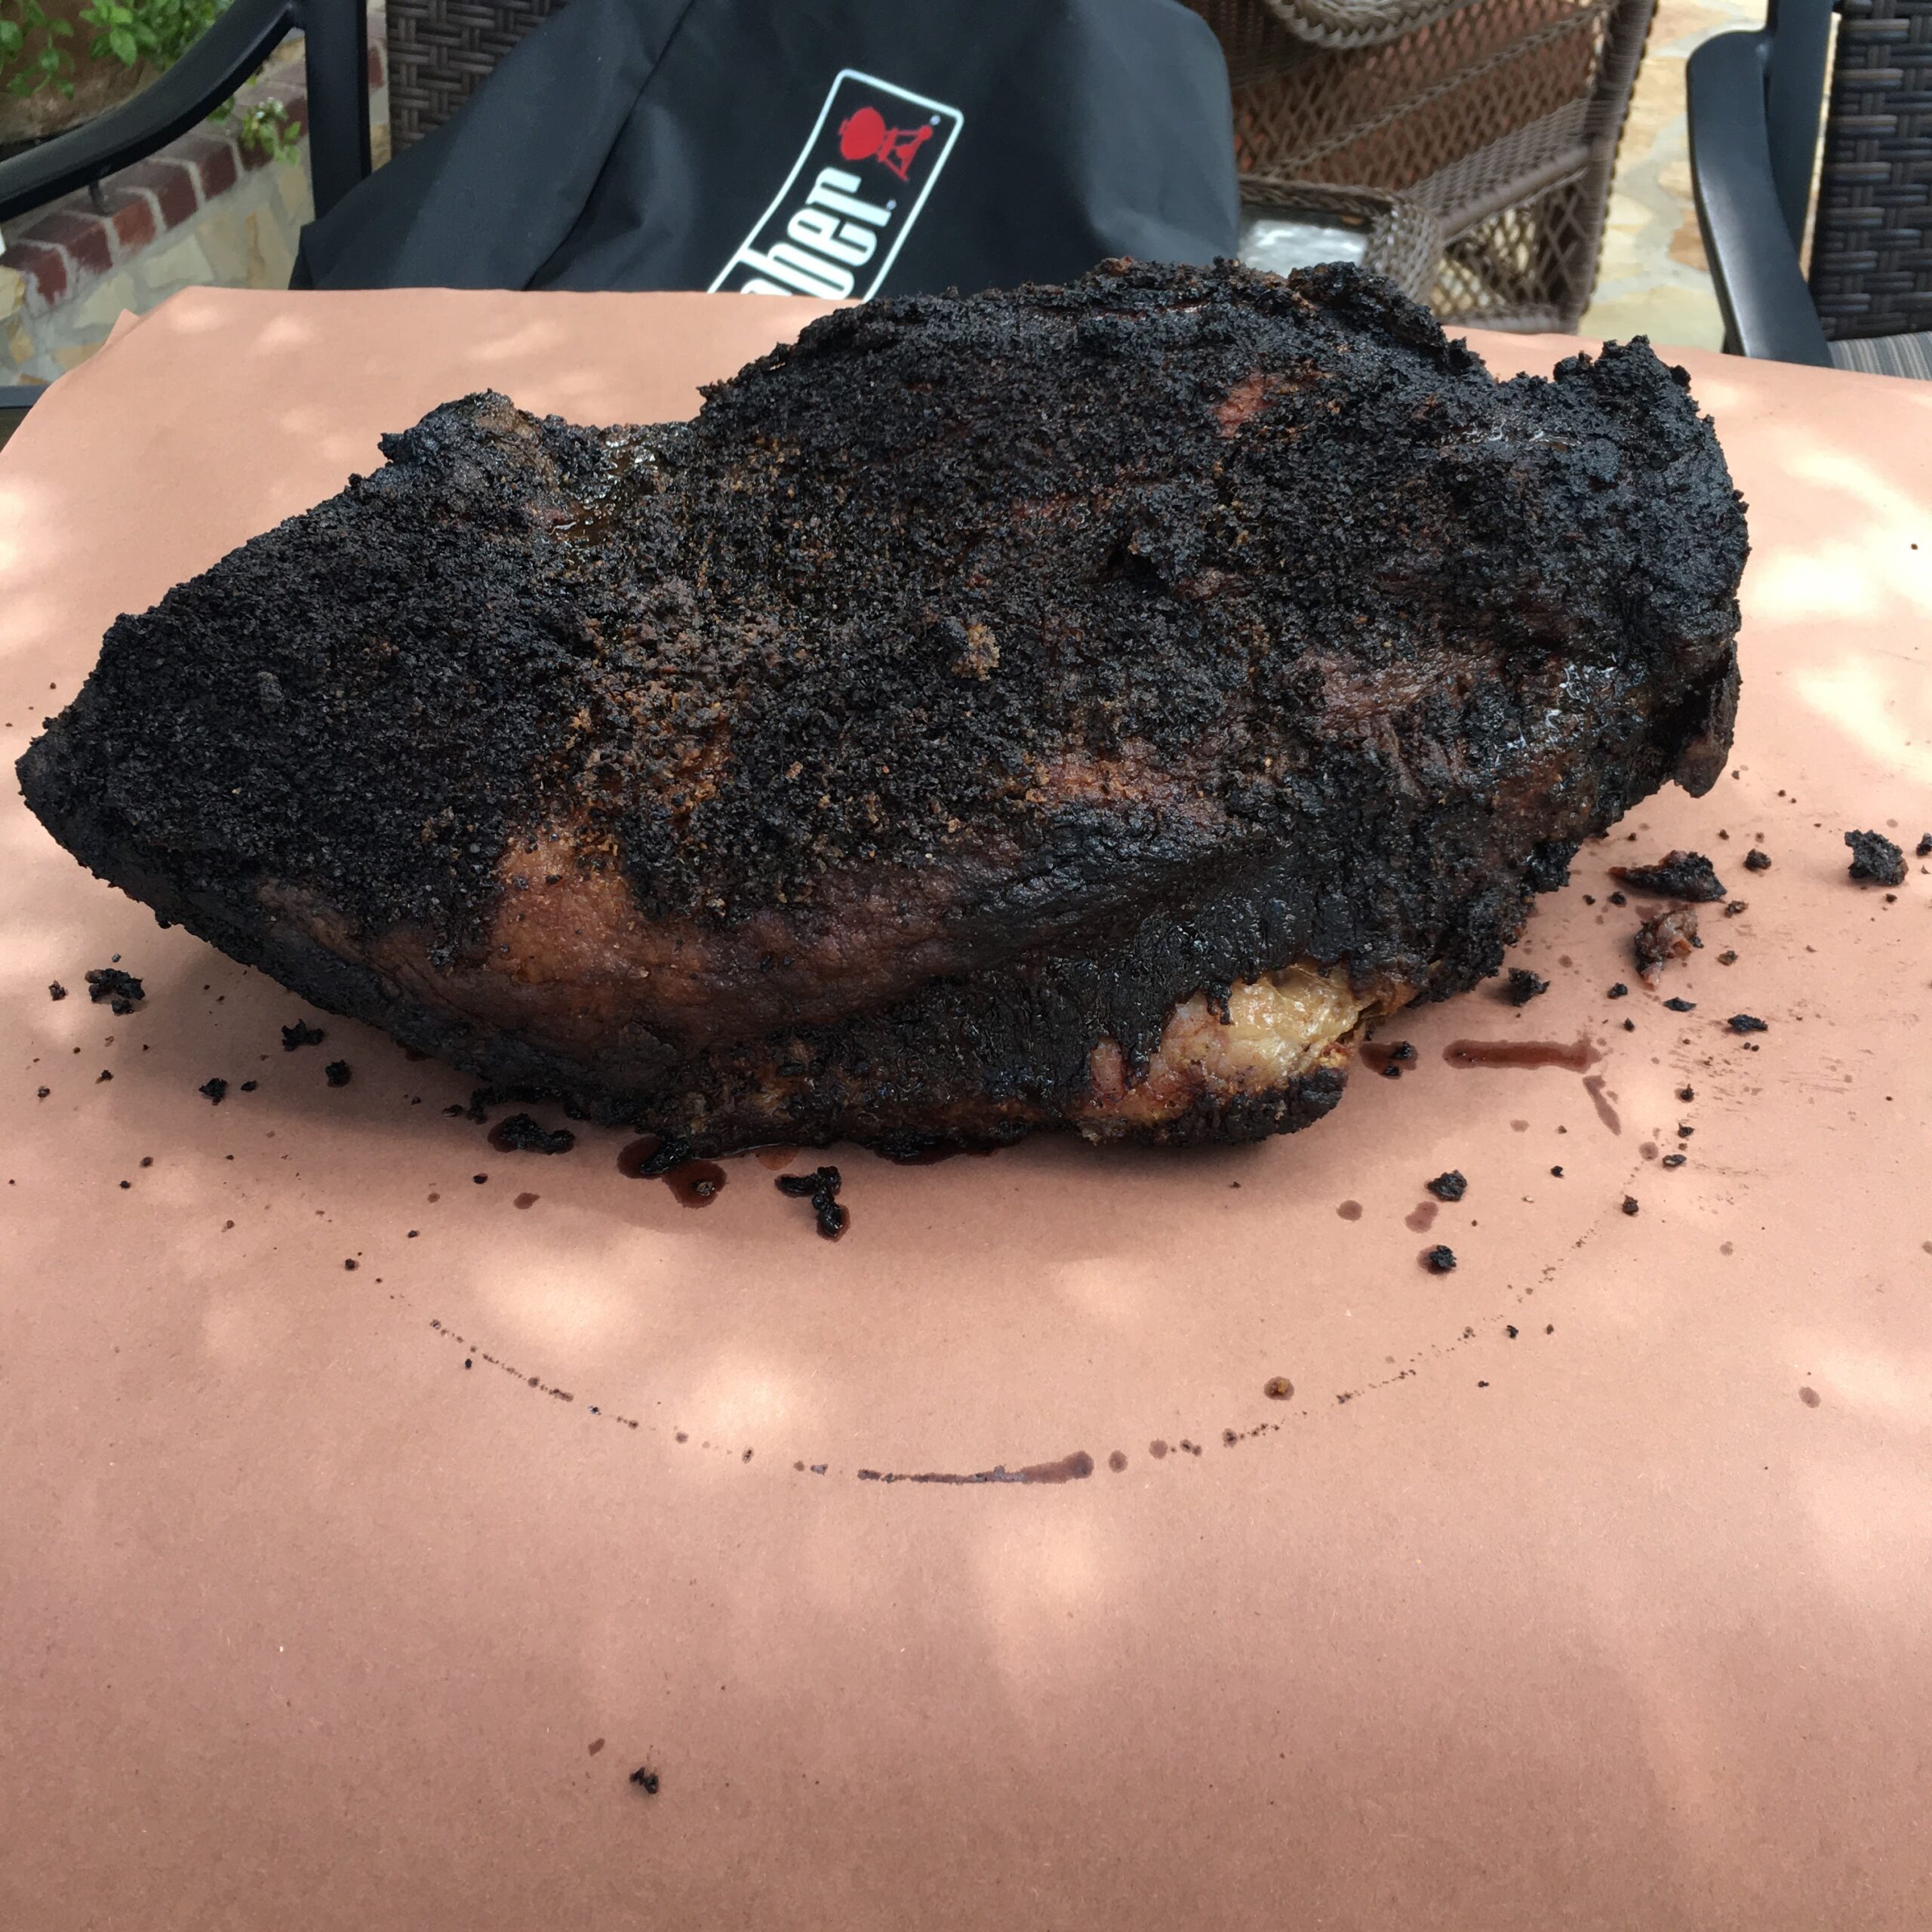 5 Things To Know About A Jiggly Smoked Brisket